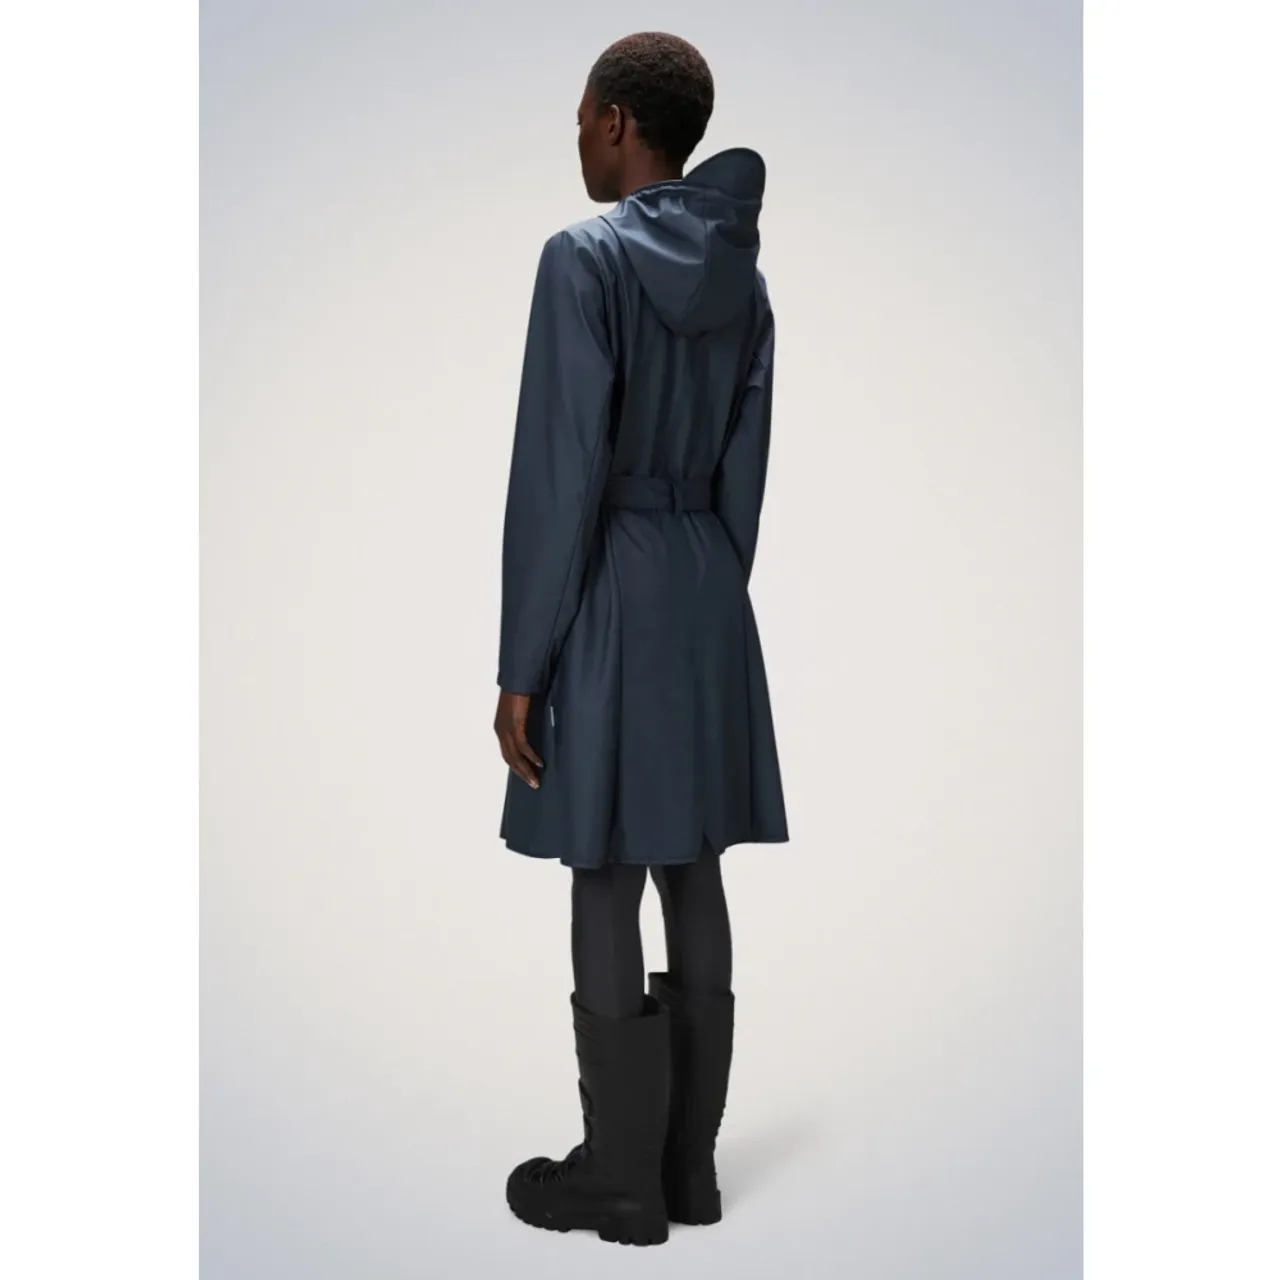 Curve W Trenchcoats in Dunkelblau,Curve Trenchcoats in Creme,Lila Curve Trenchcoat Rains